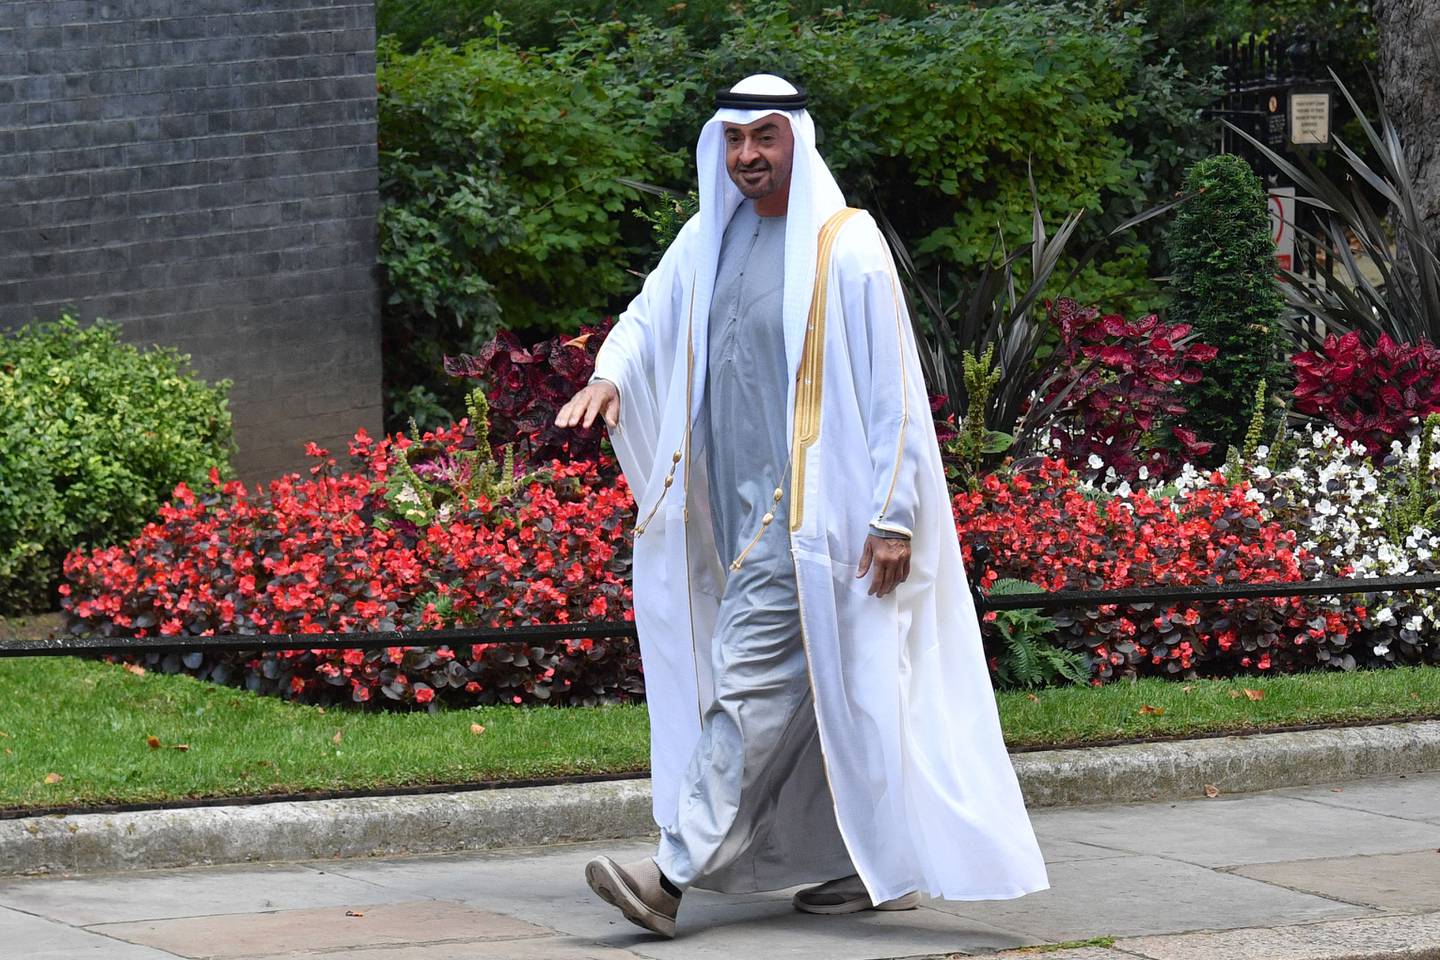 Sheikh Mohamed bin Zayed, Crown Prince of Abu Dhabi and Deputy Supreme Commander of the Armed Forces, arrives at 10 Downing Street. AFP